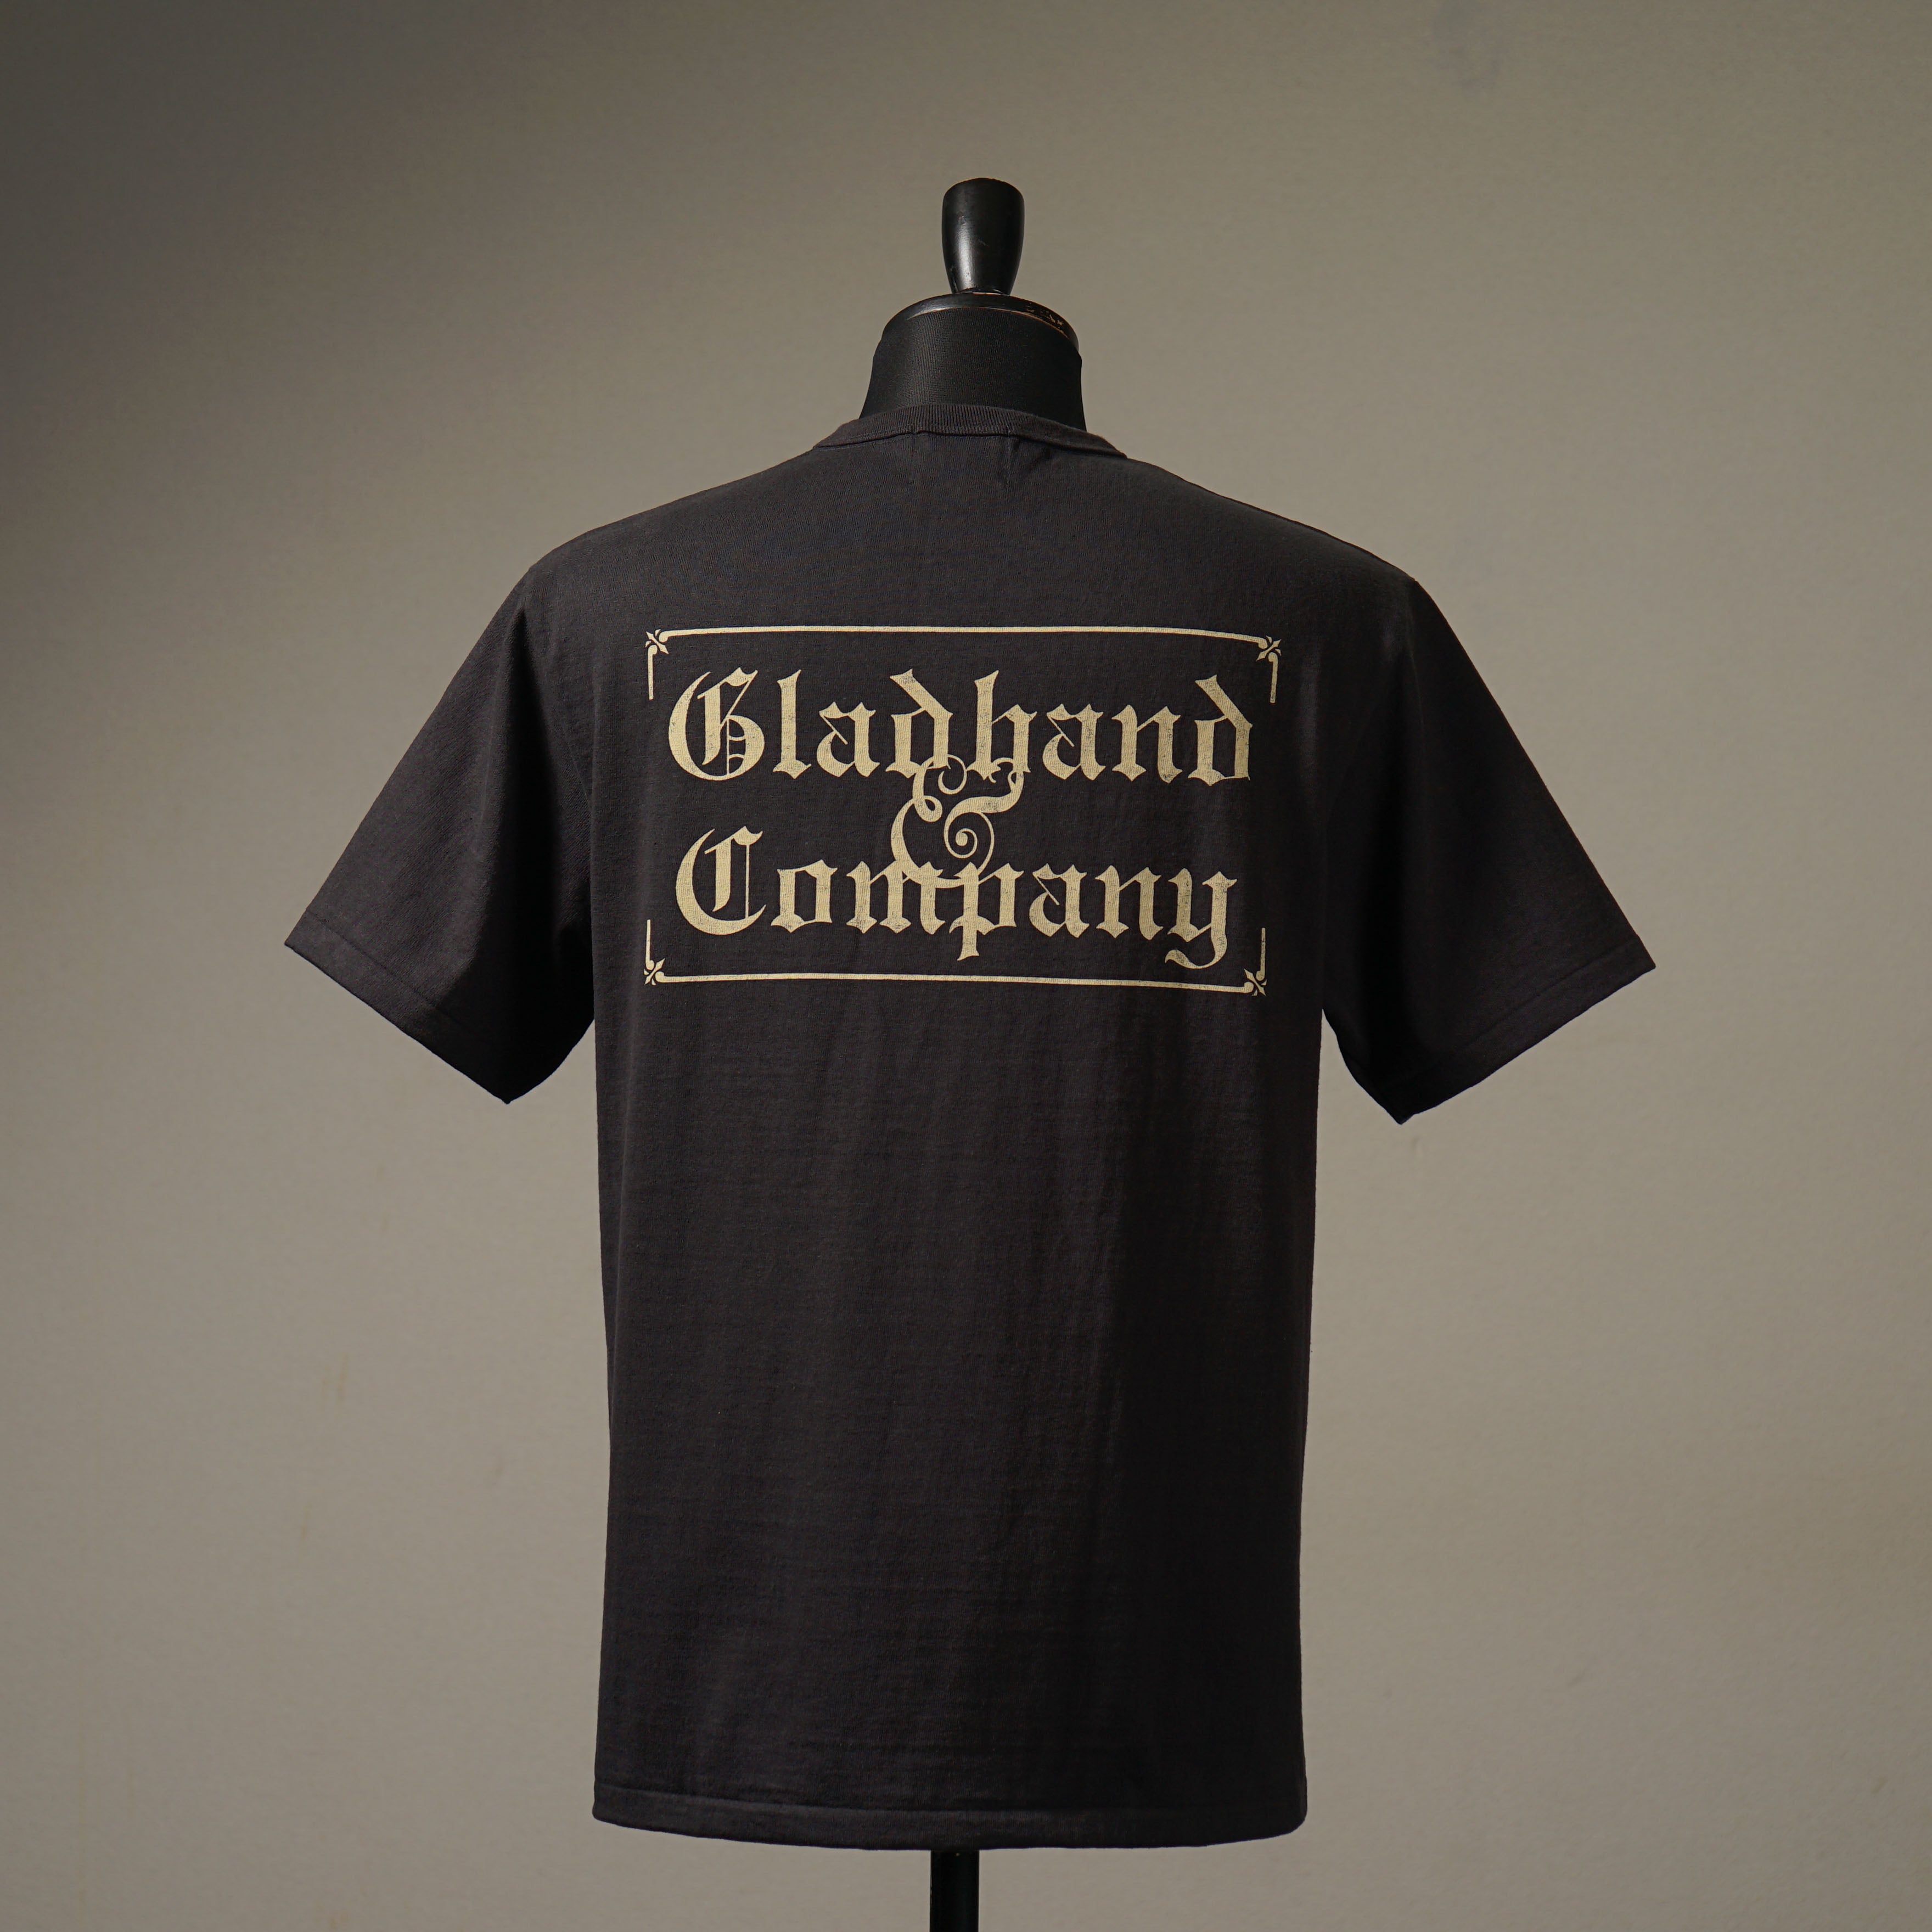 NEW – GLADHAND & Co.